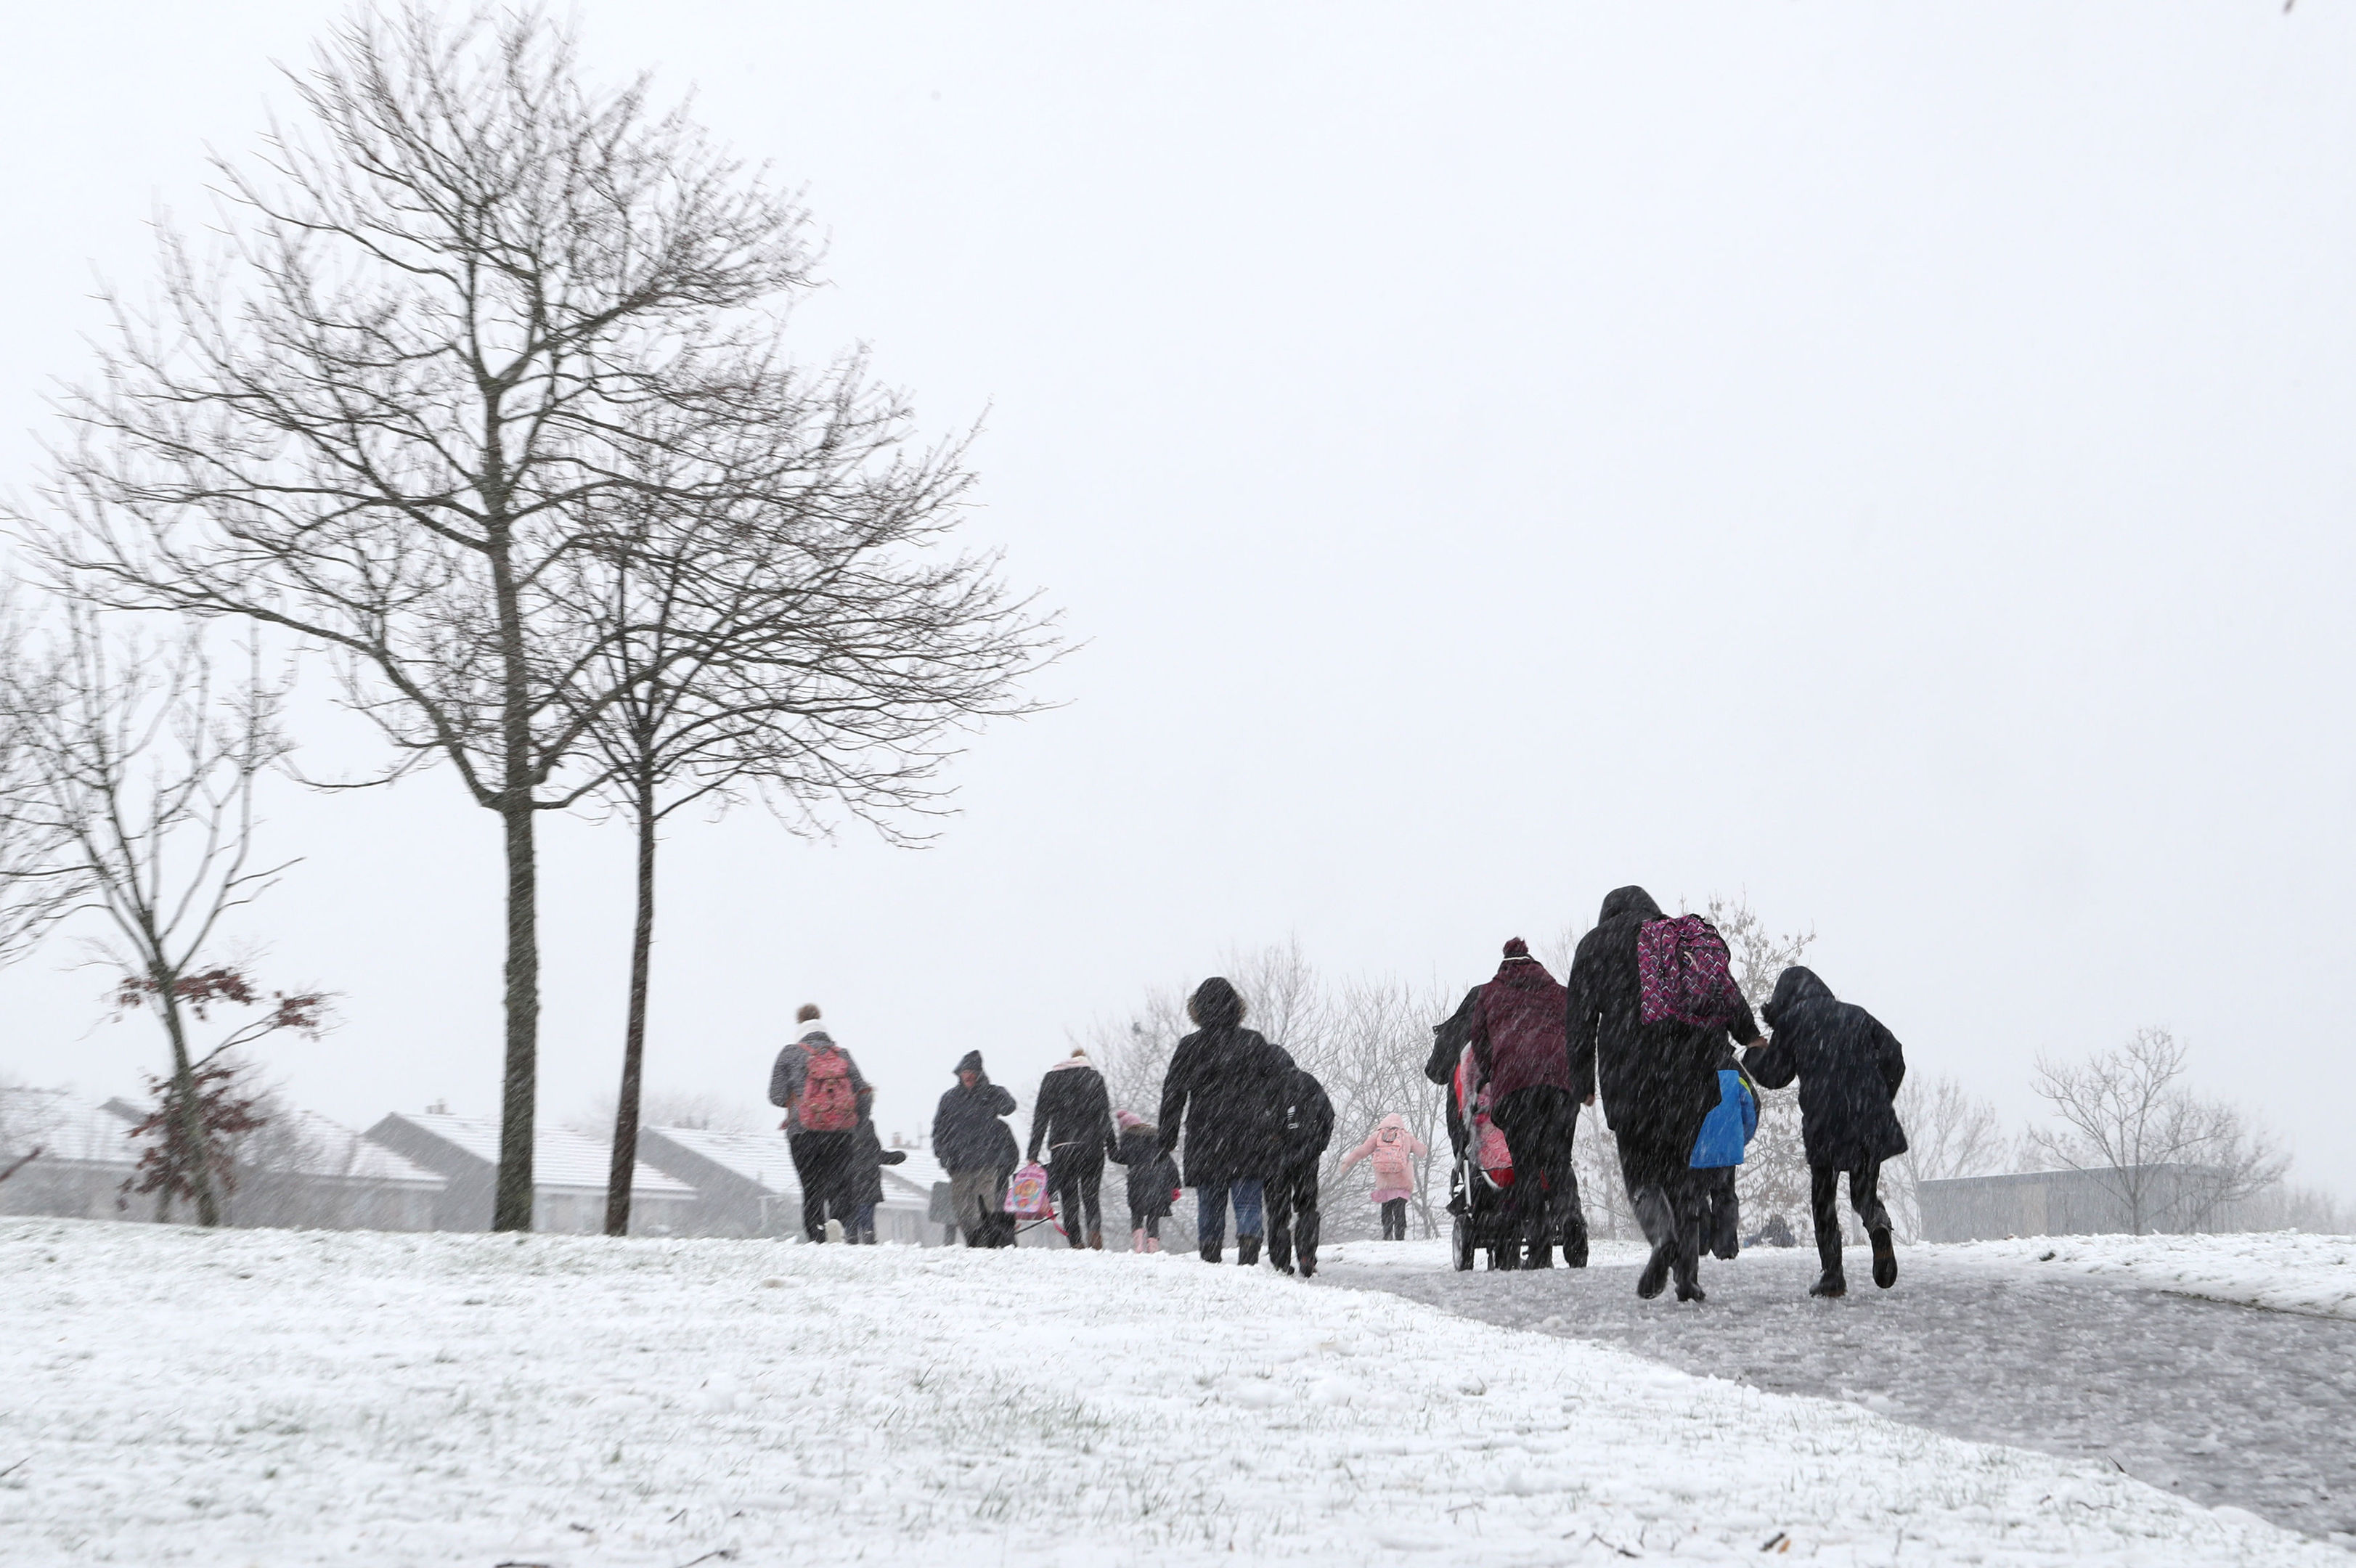 People make their way through the snow in Mauricewood Park in Penicuik, Midlothian, as flights have been cancelled and commuters were warned they faced delays after Storm Doris reached nearly 90mph (Jane Barlow/PA Wire)